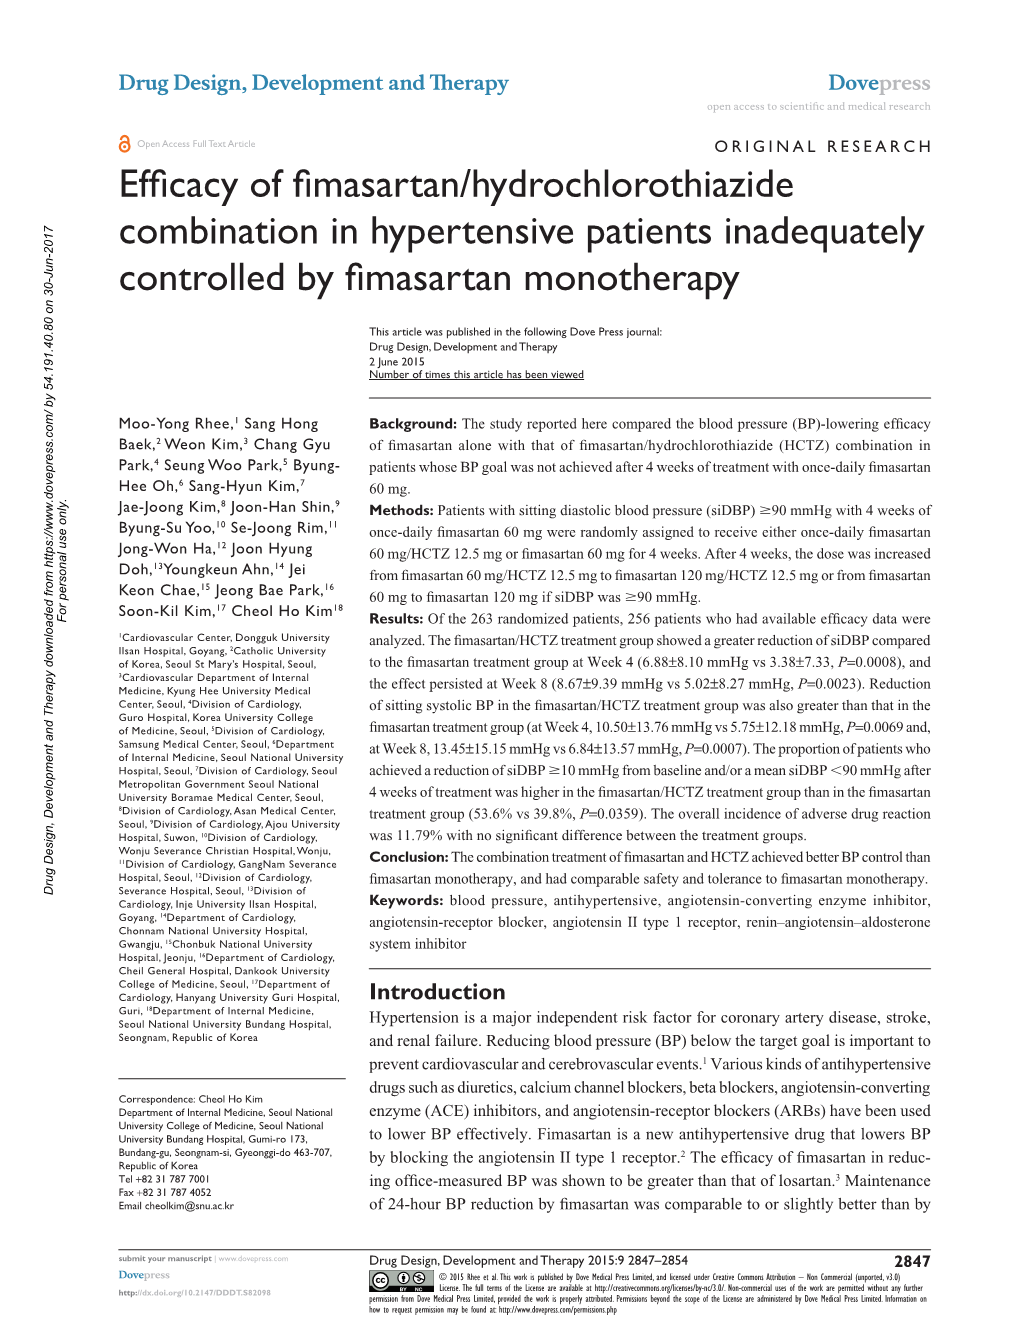 Efficacy of Fimasartan/Hydrochlorothiazide Combination in Hypertensive Patients Inadequately Controlled by Fimasartan Monotherapy